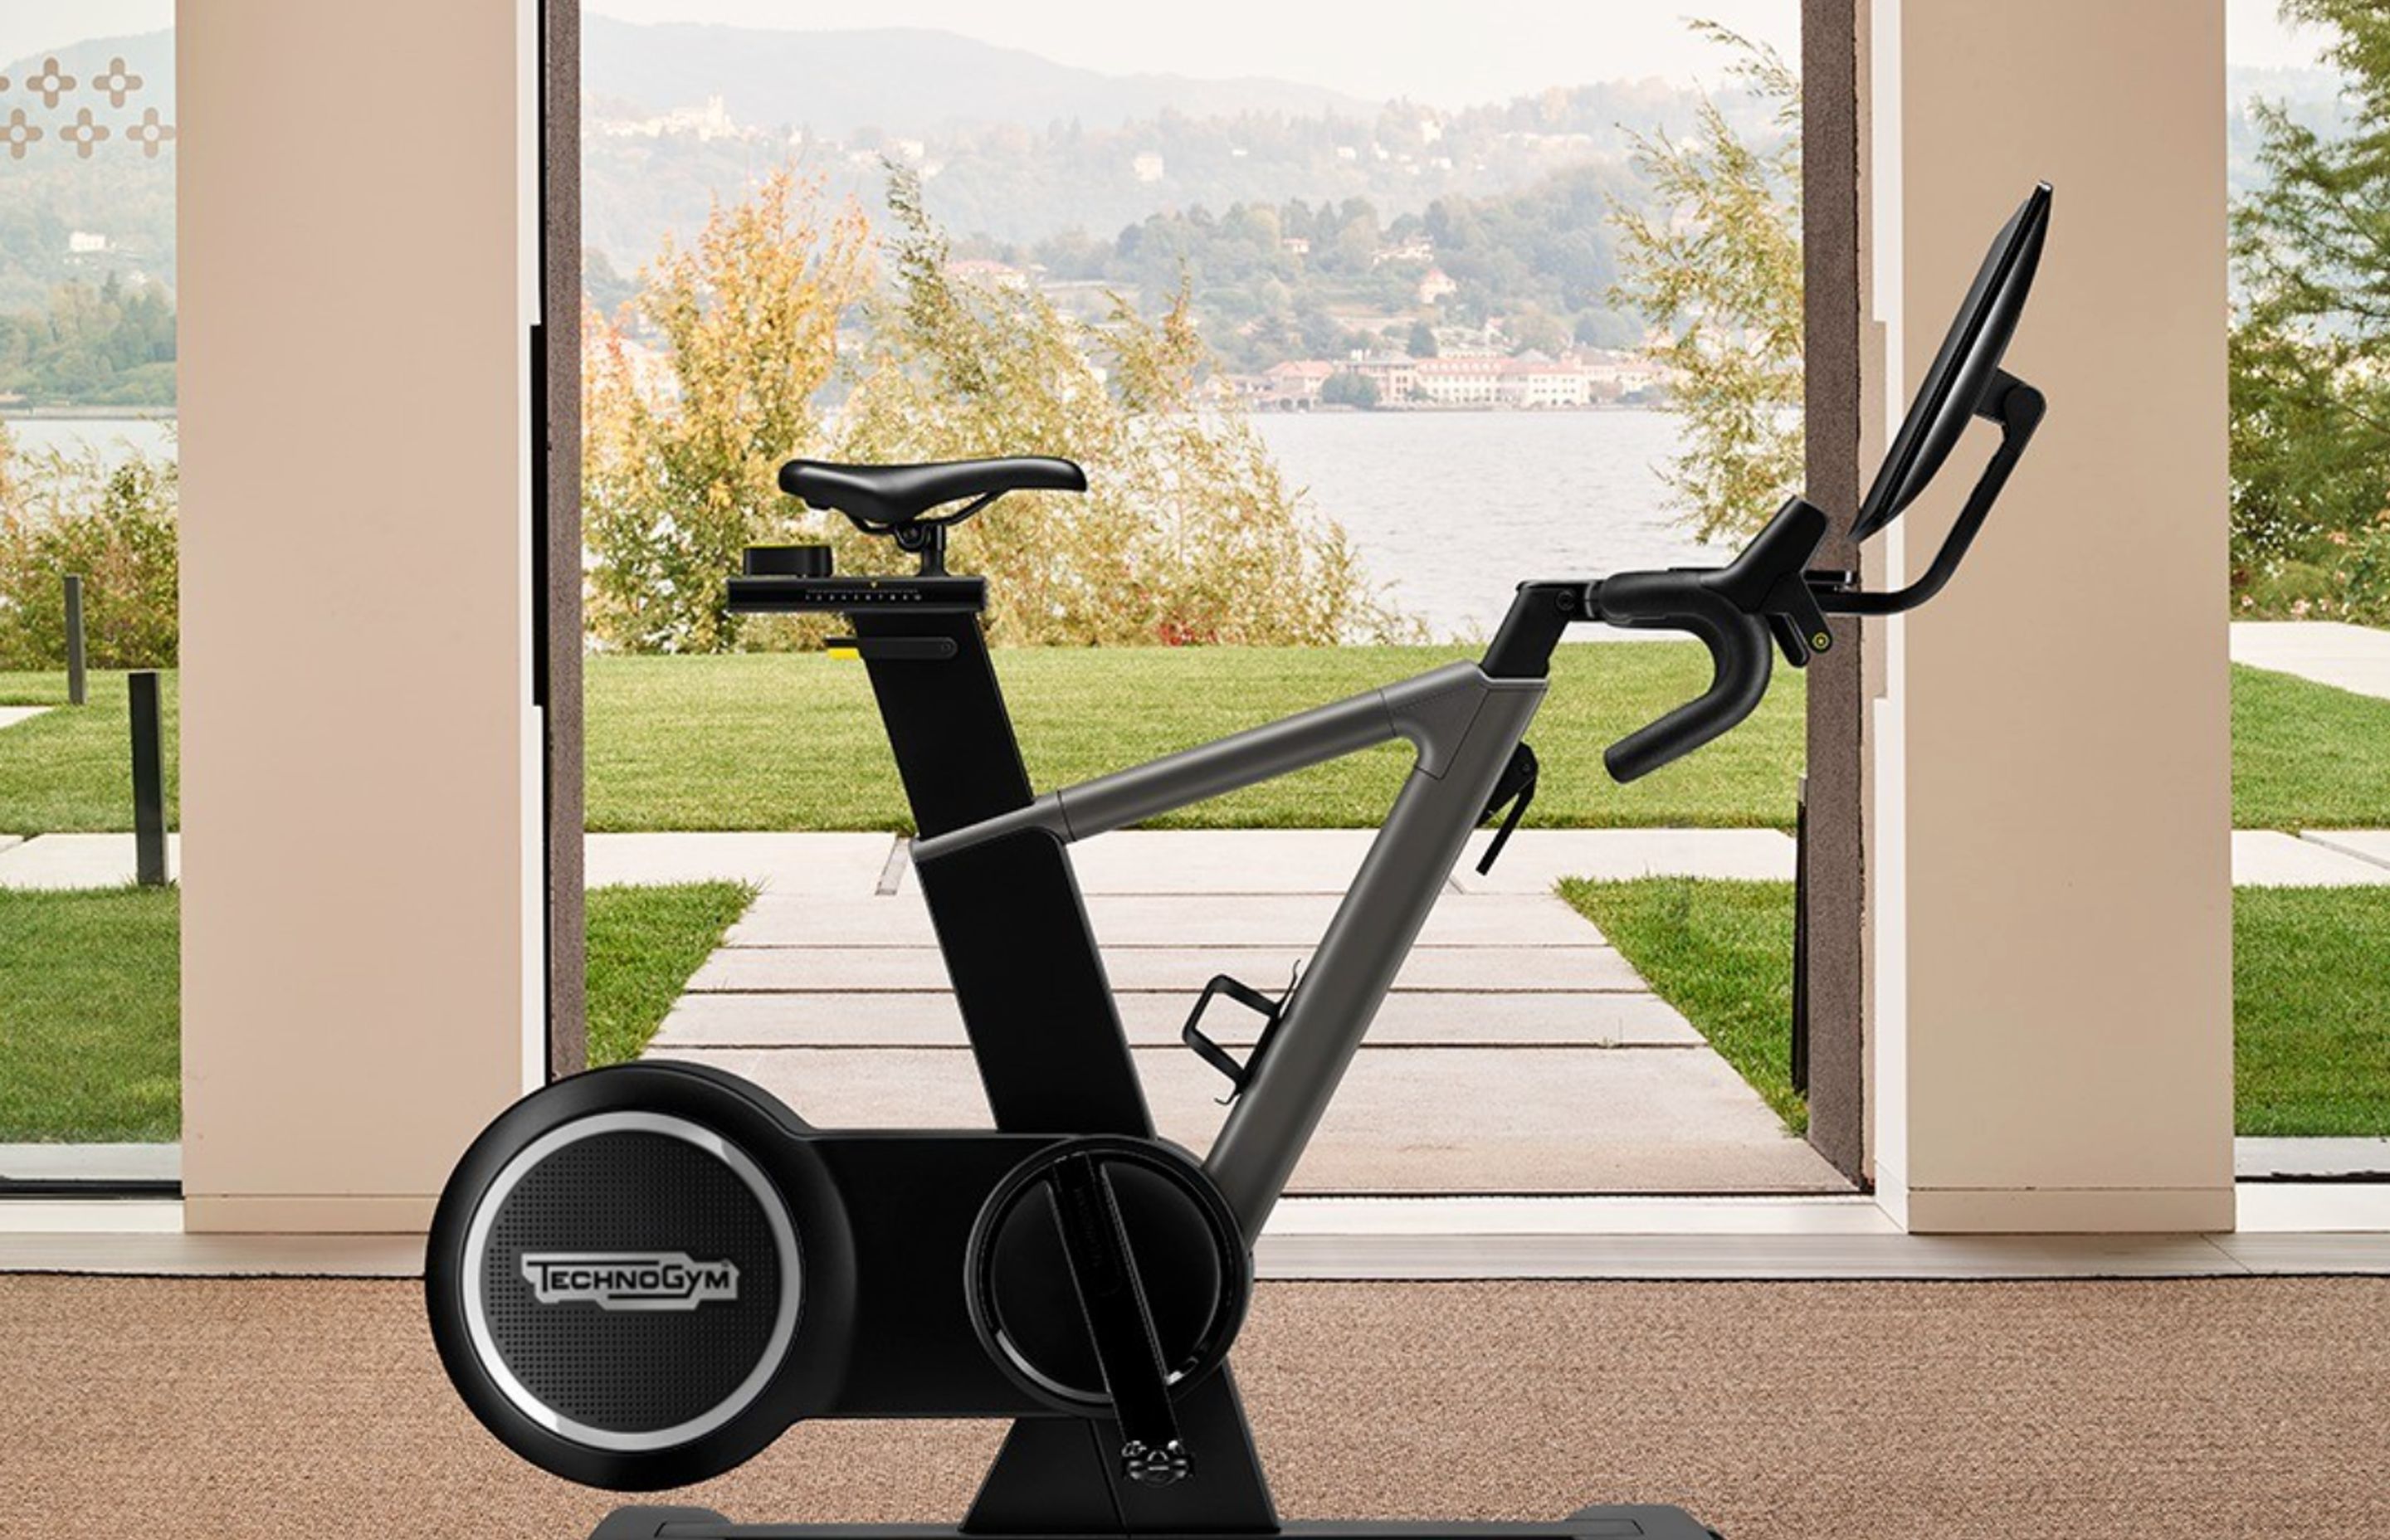 The Technogym Ride can be paired with the Technogym Bench for an effective workout, says Mark.